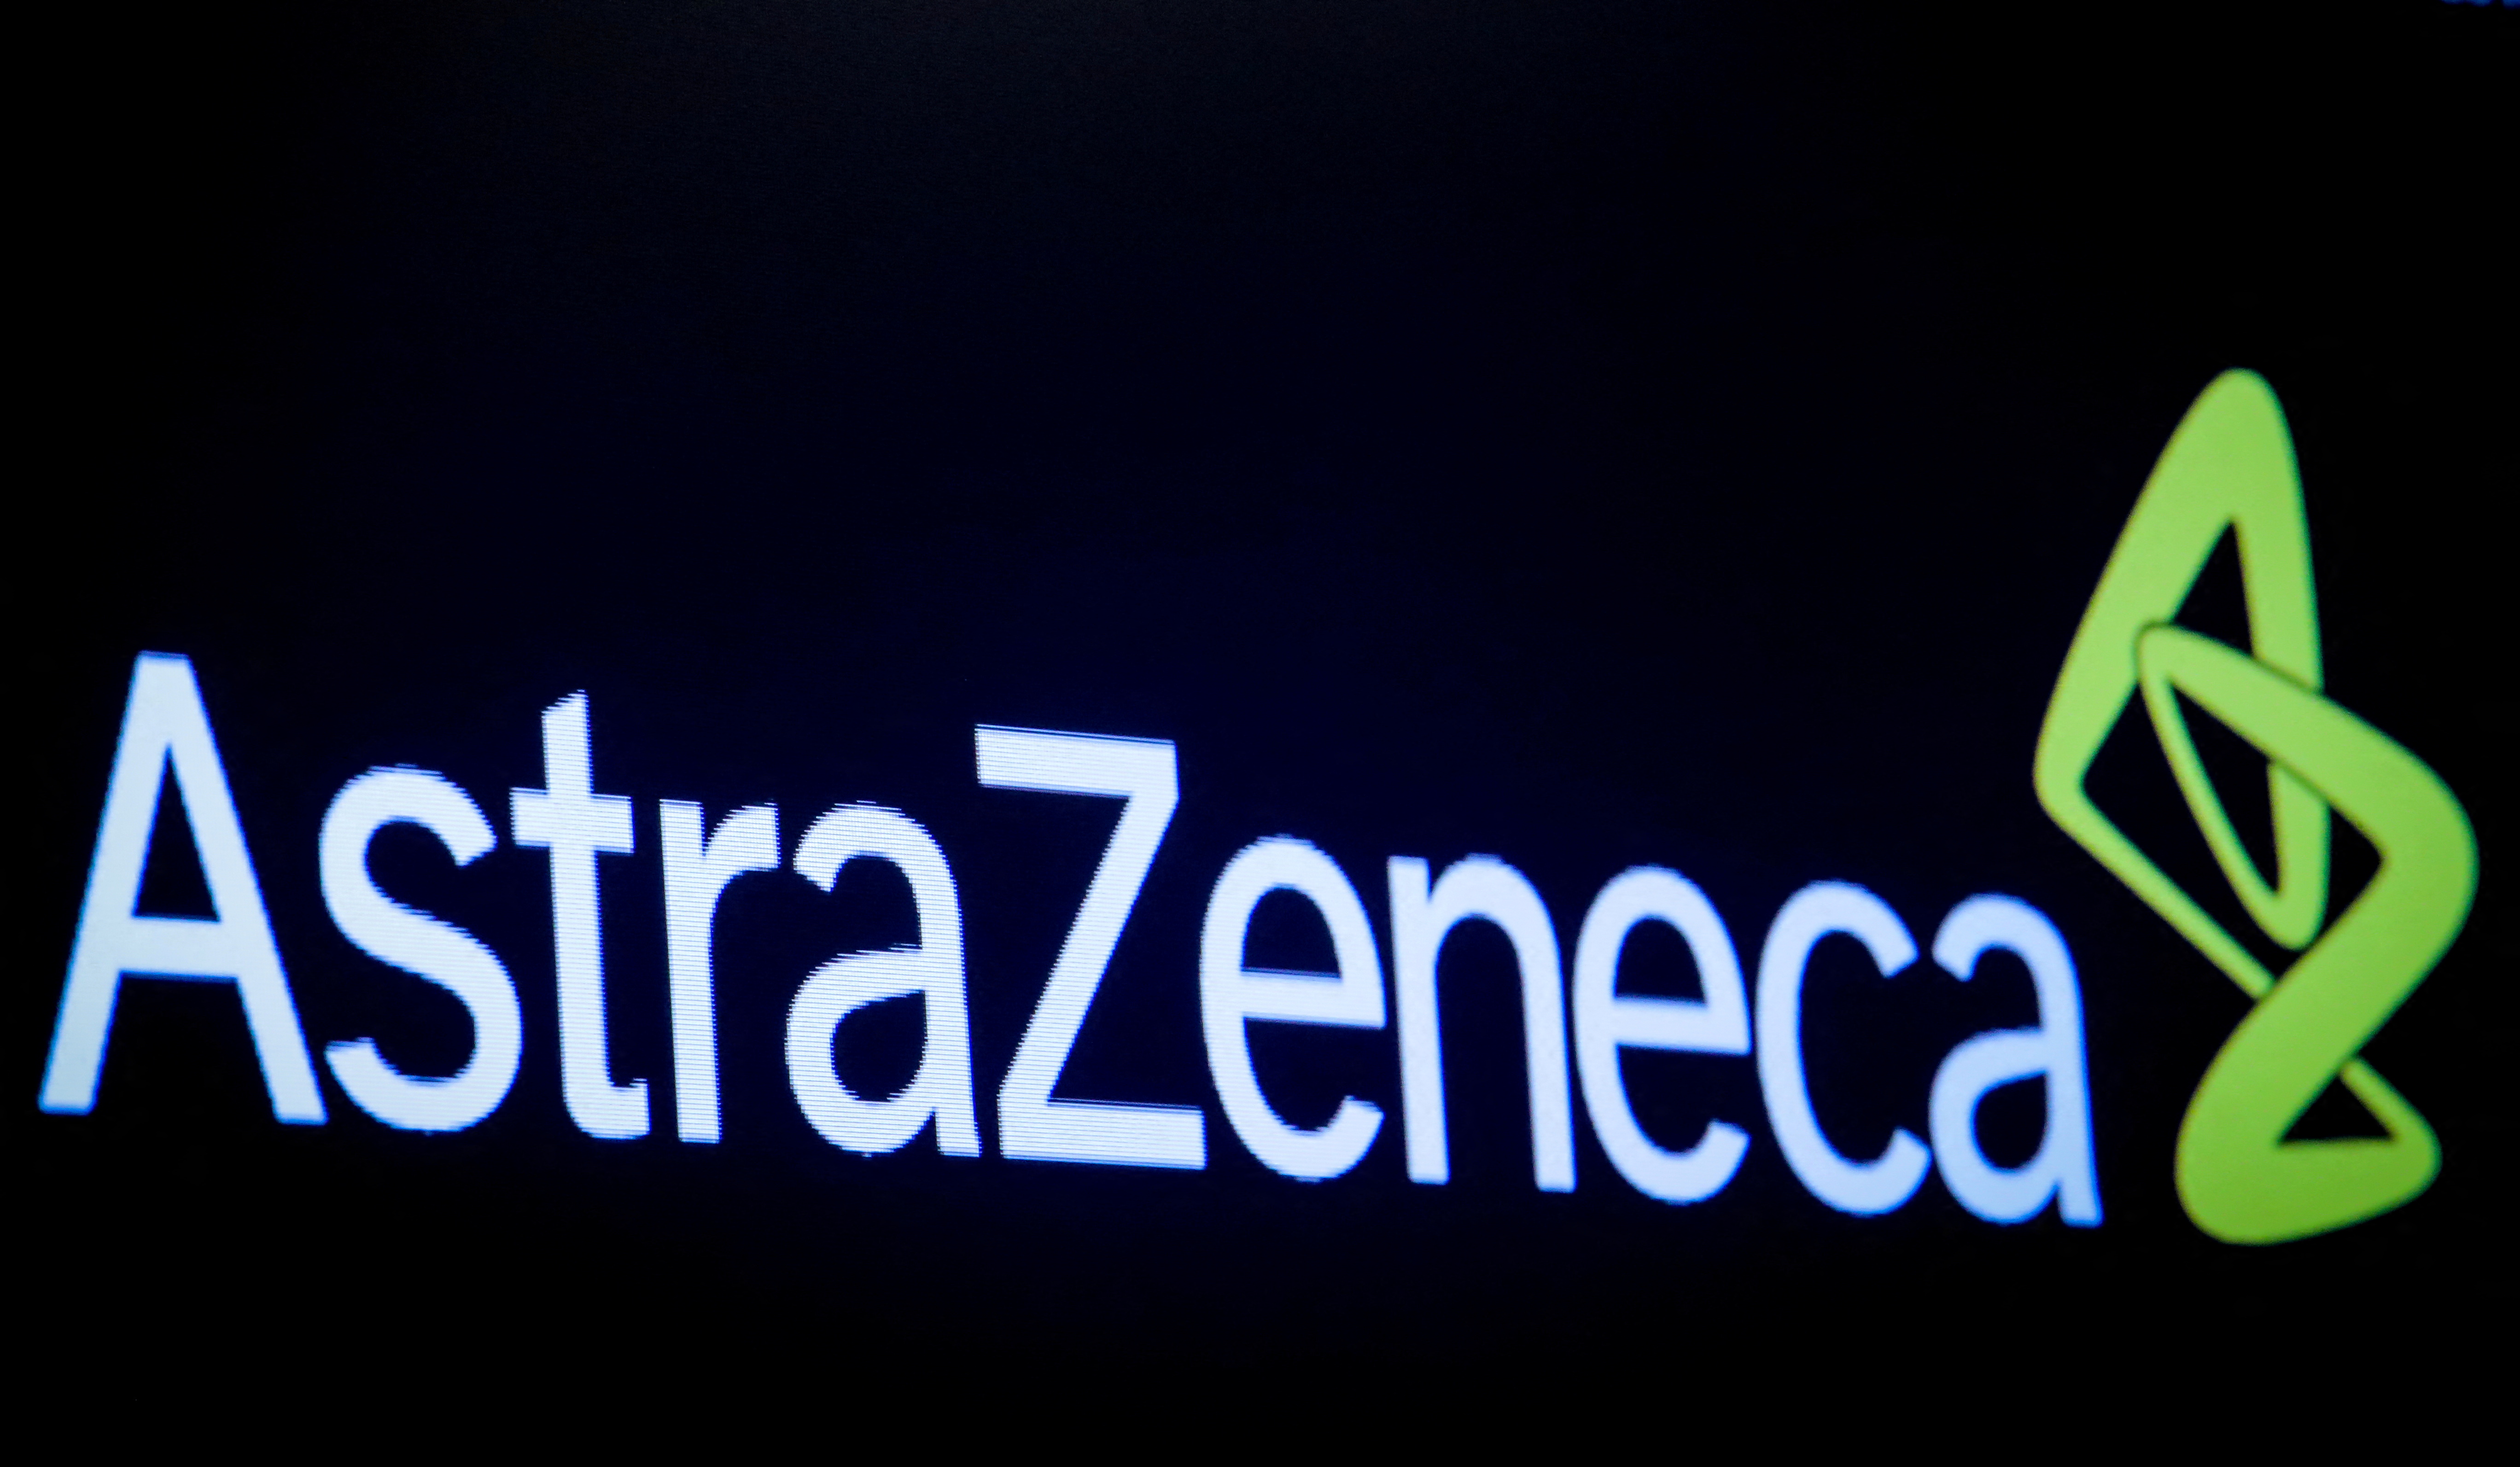 The company logo for pharmaceutical company AstraZeneca is displayed on a screen on the floor at the NYSE in New York, United States